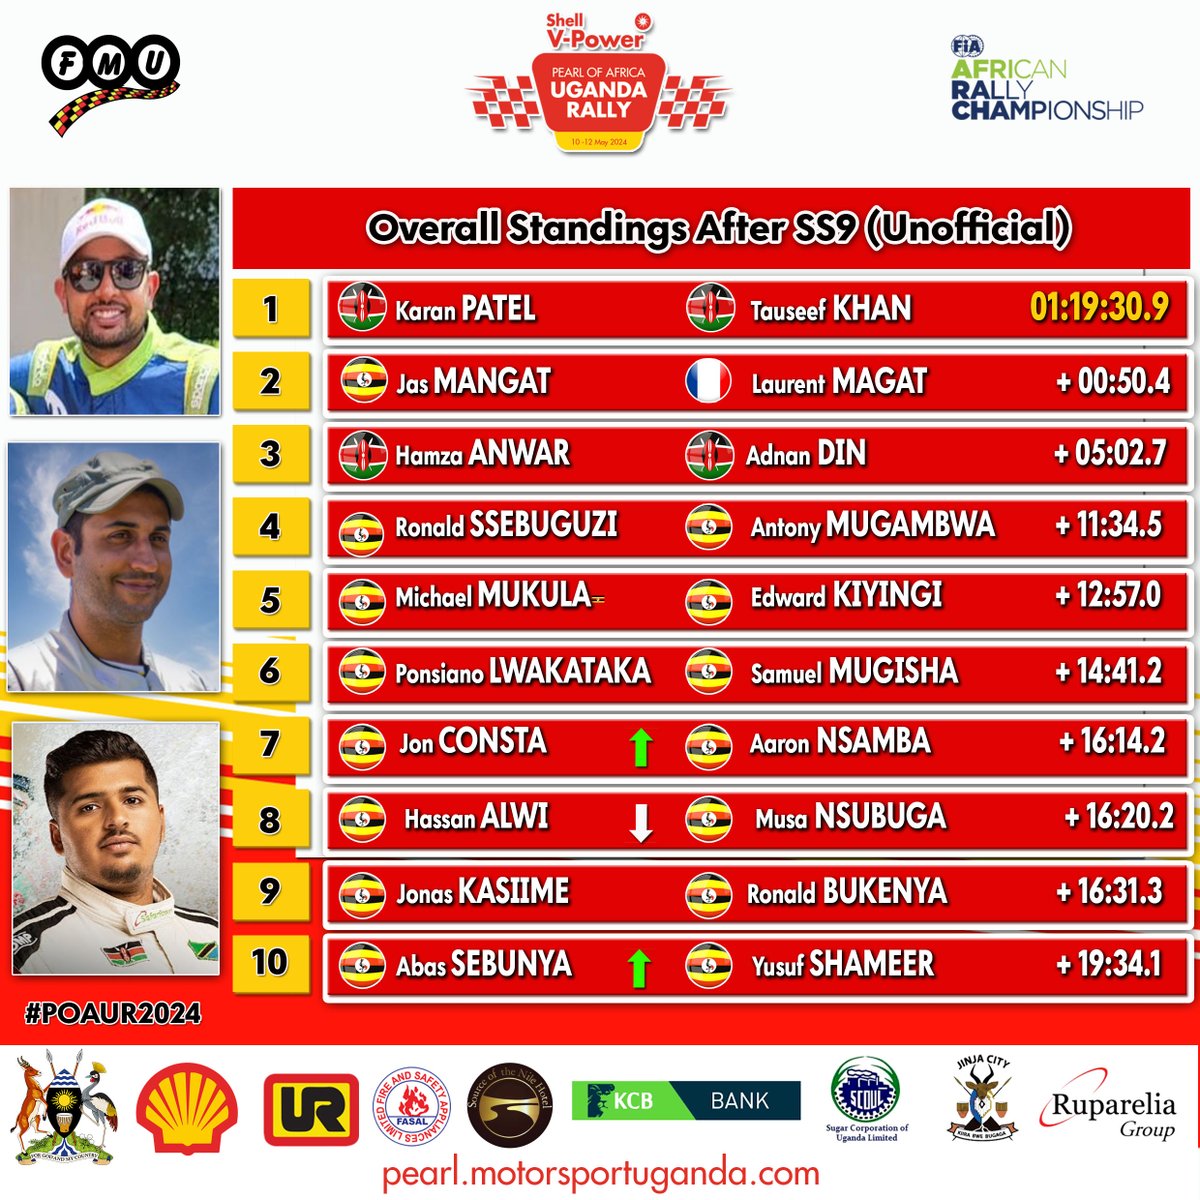 Overall Standings after SS9. Abas Sebunya has entered the top 10 pack #POAUR2024